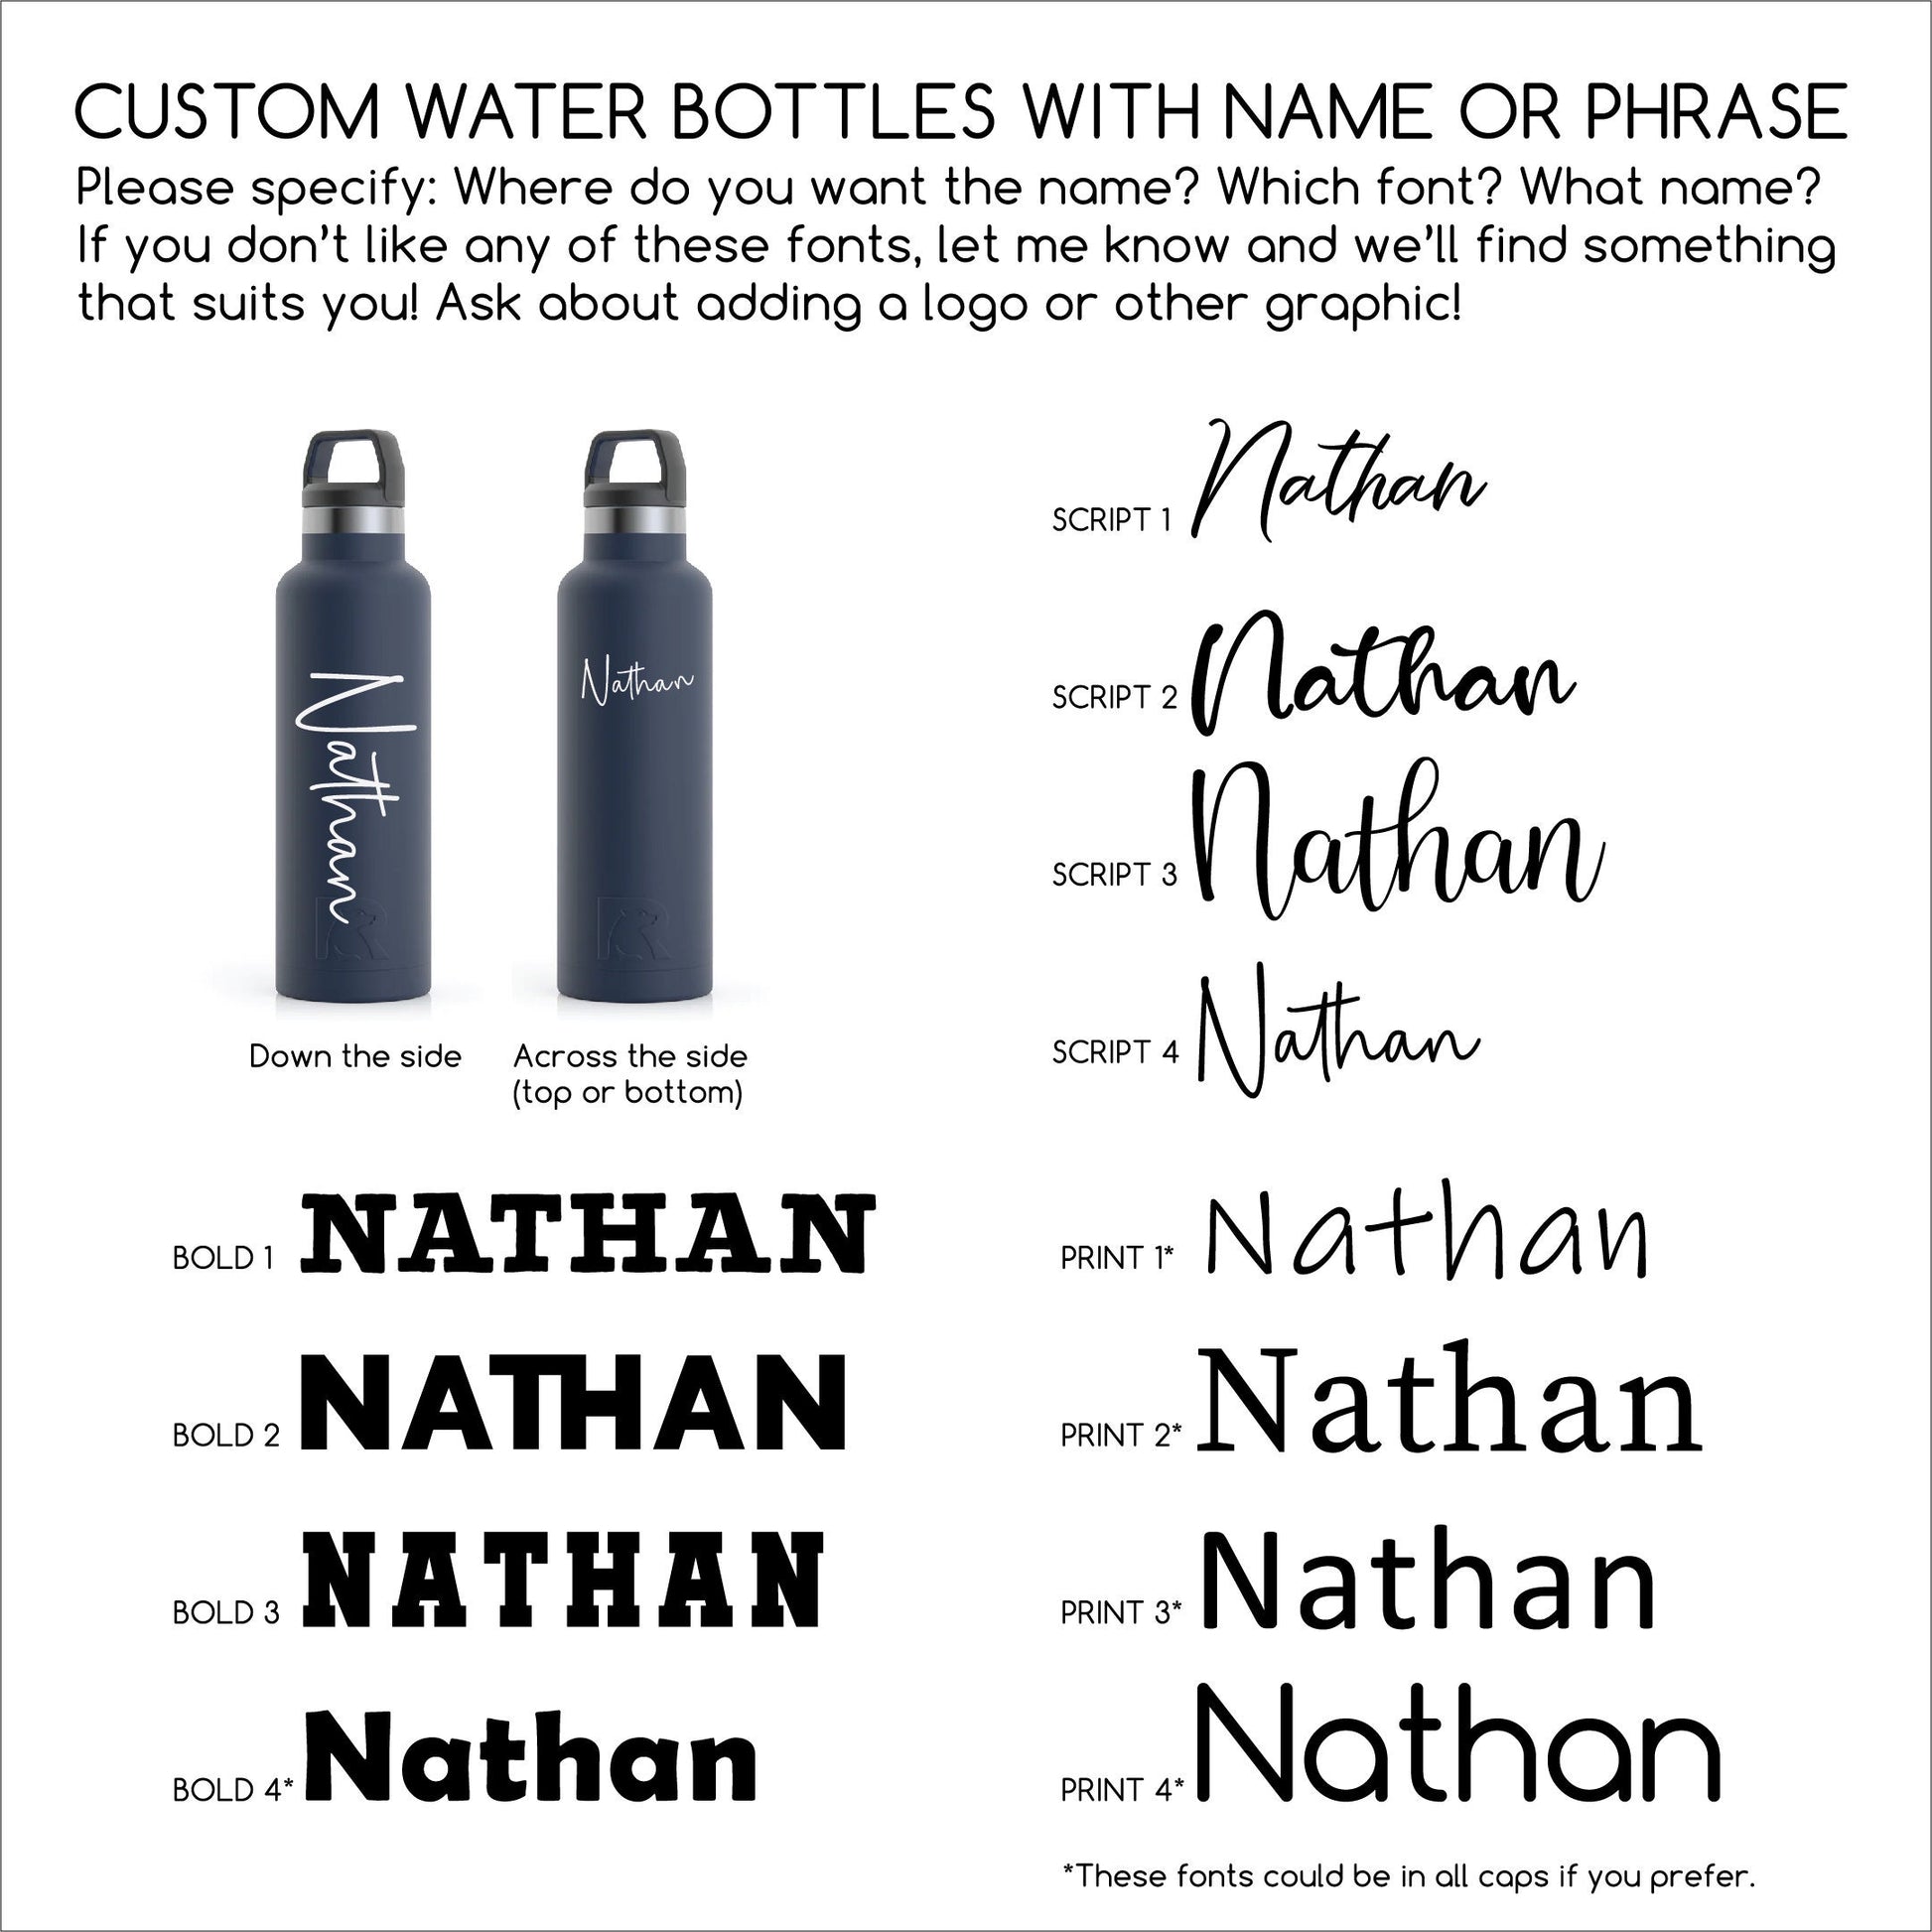 Personalized 12oz Stainless Steel Bottle Olive Green